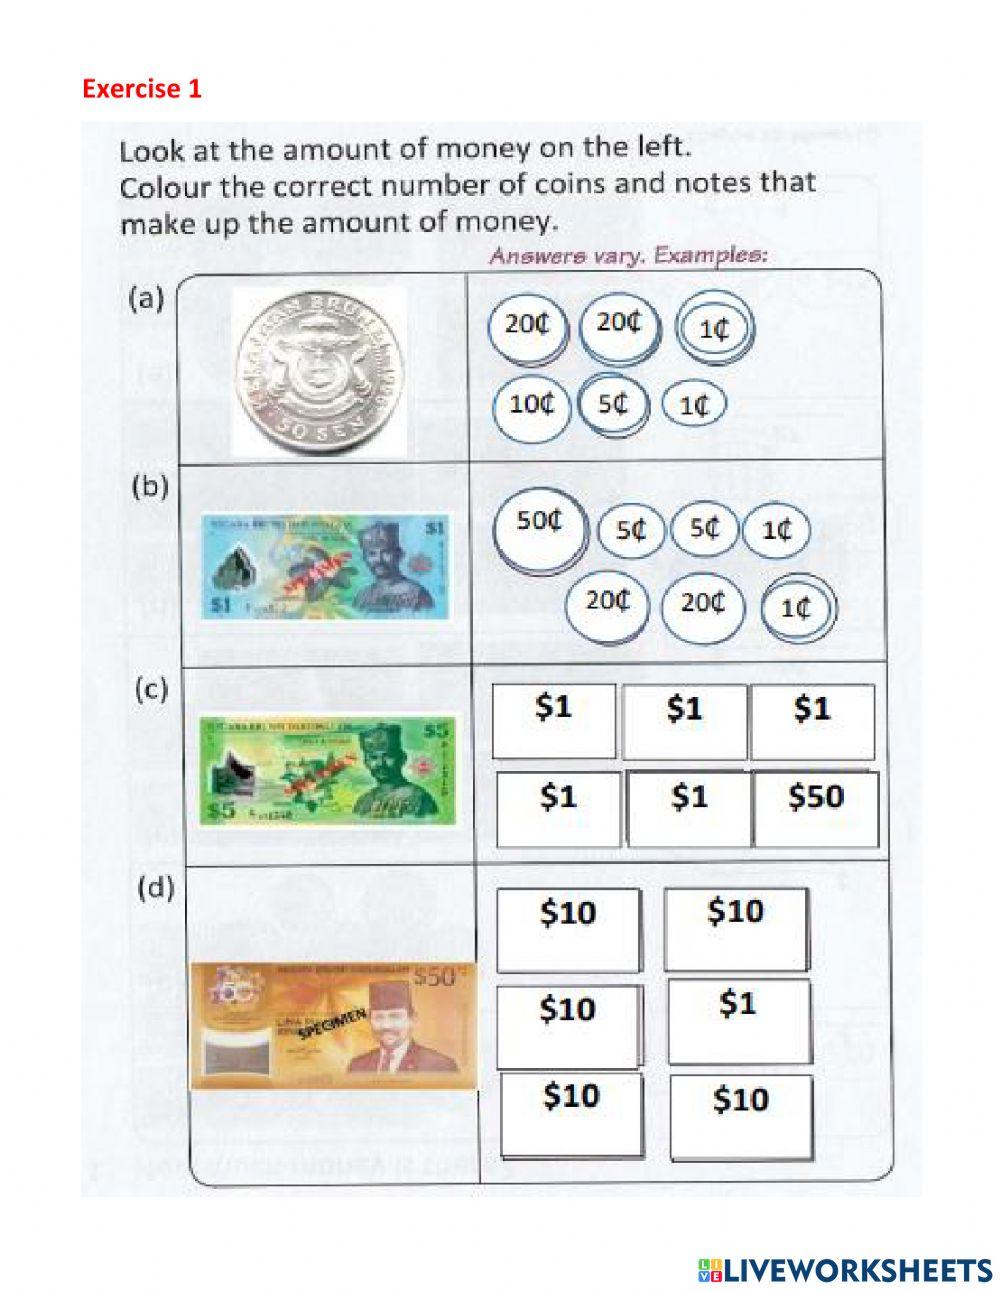 Colour the correct number of coins and notes that make up that money